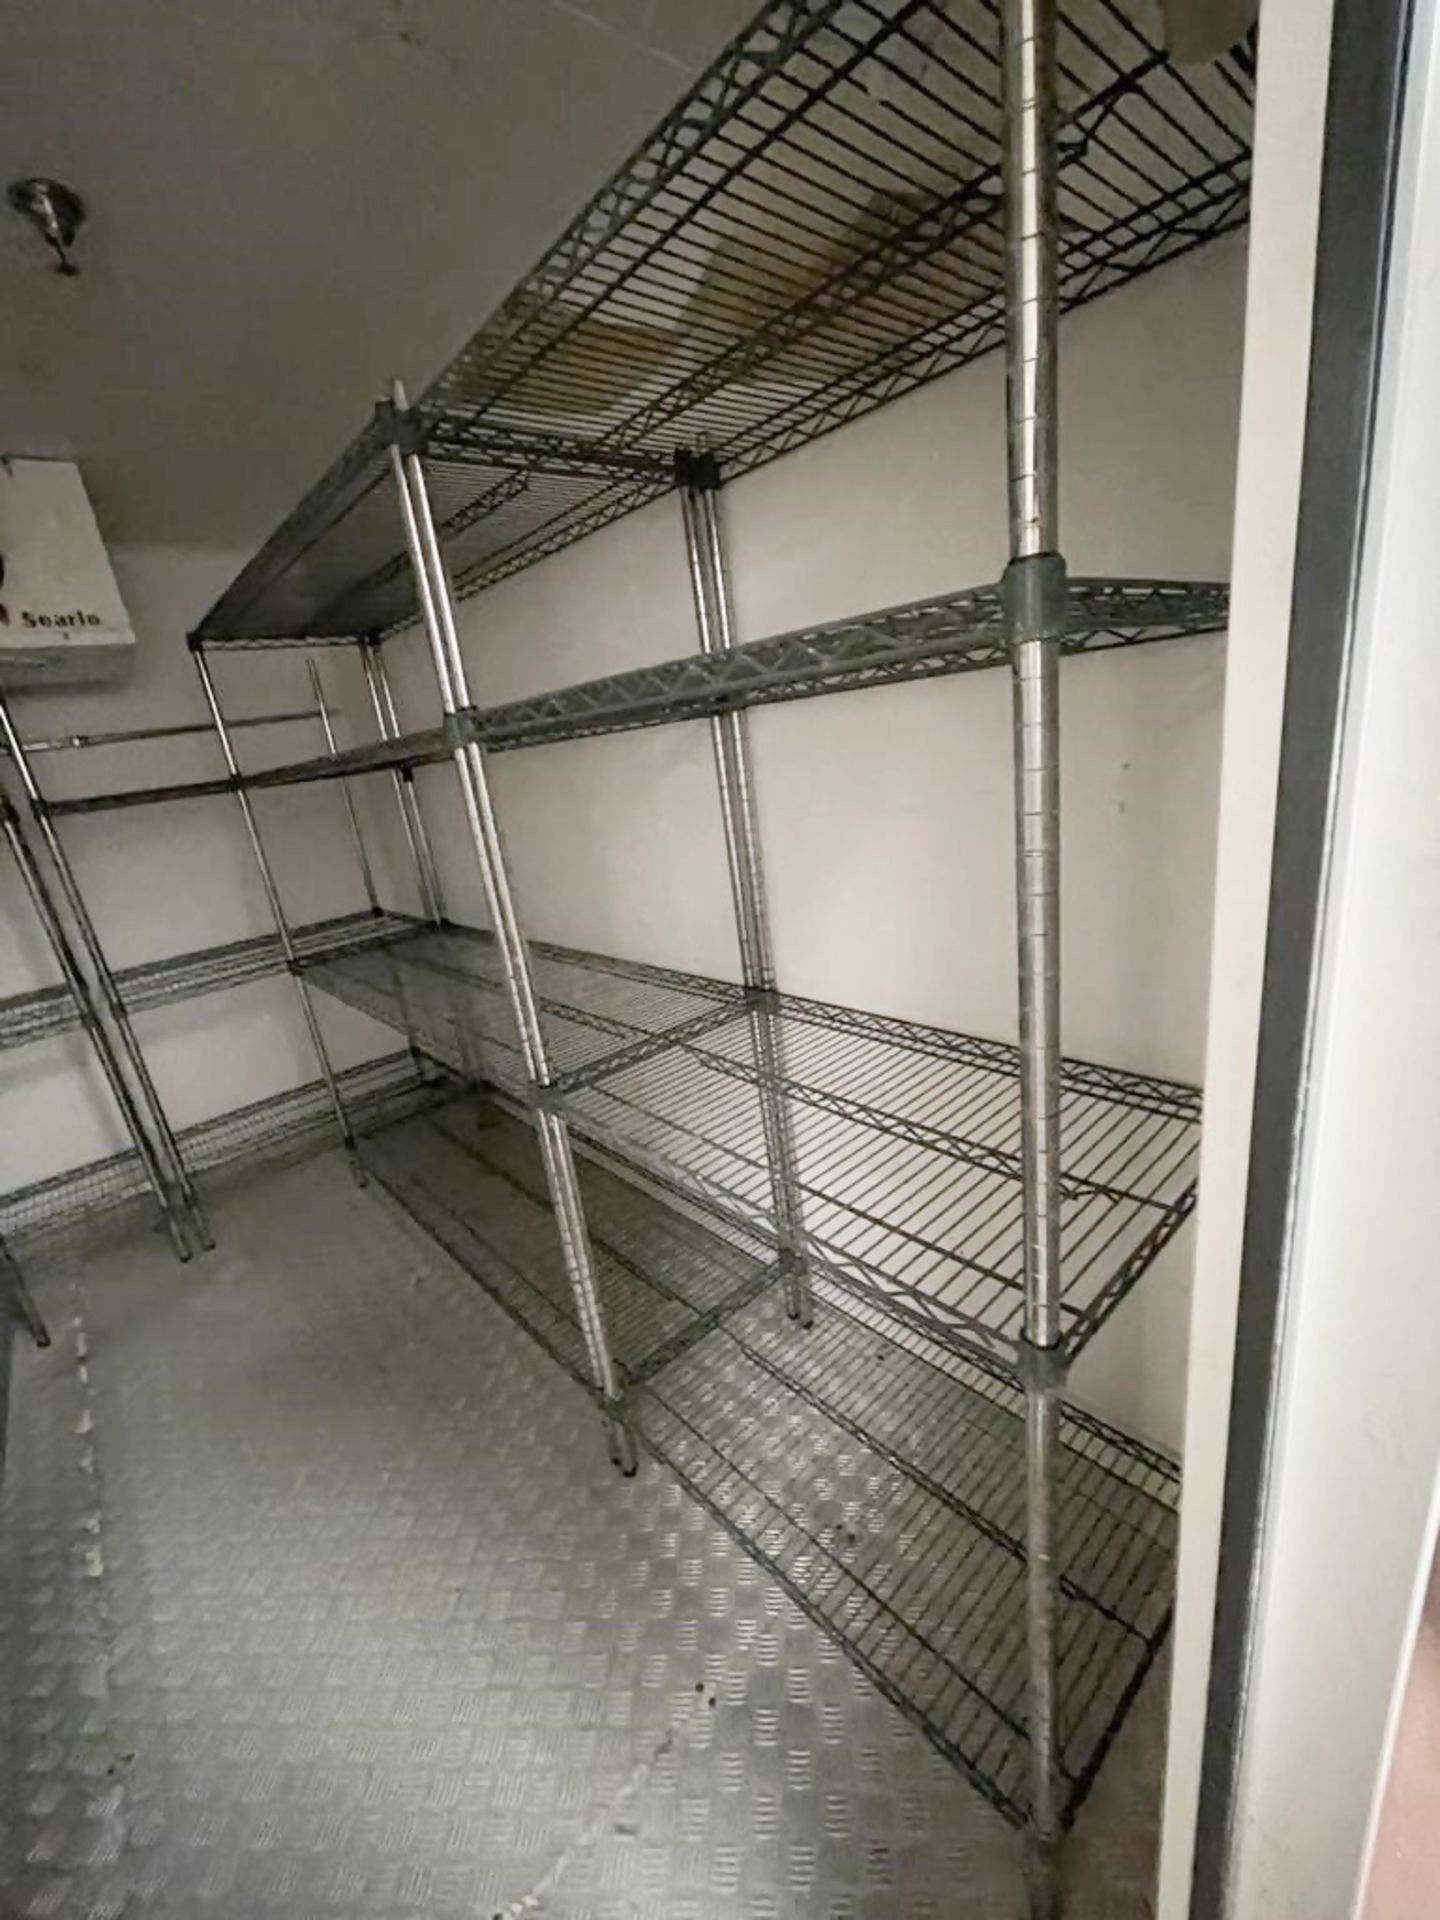 5 x Wire Shelving Racks For Cold Rooms / Commercial Kitchens - CL805 - Location: Altrincham - Image 2 of 2